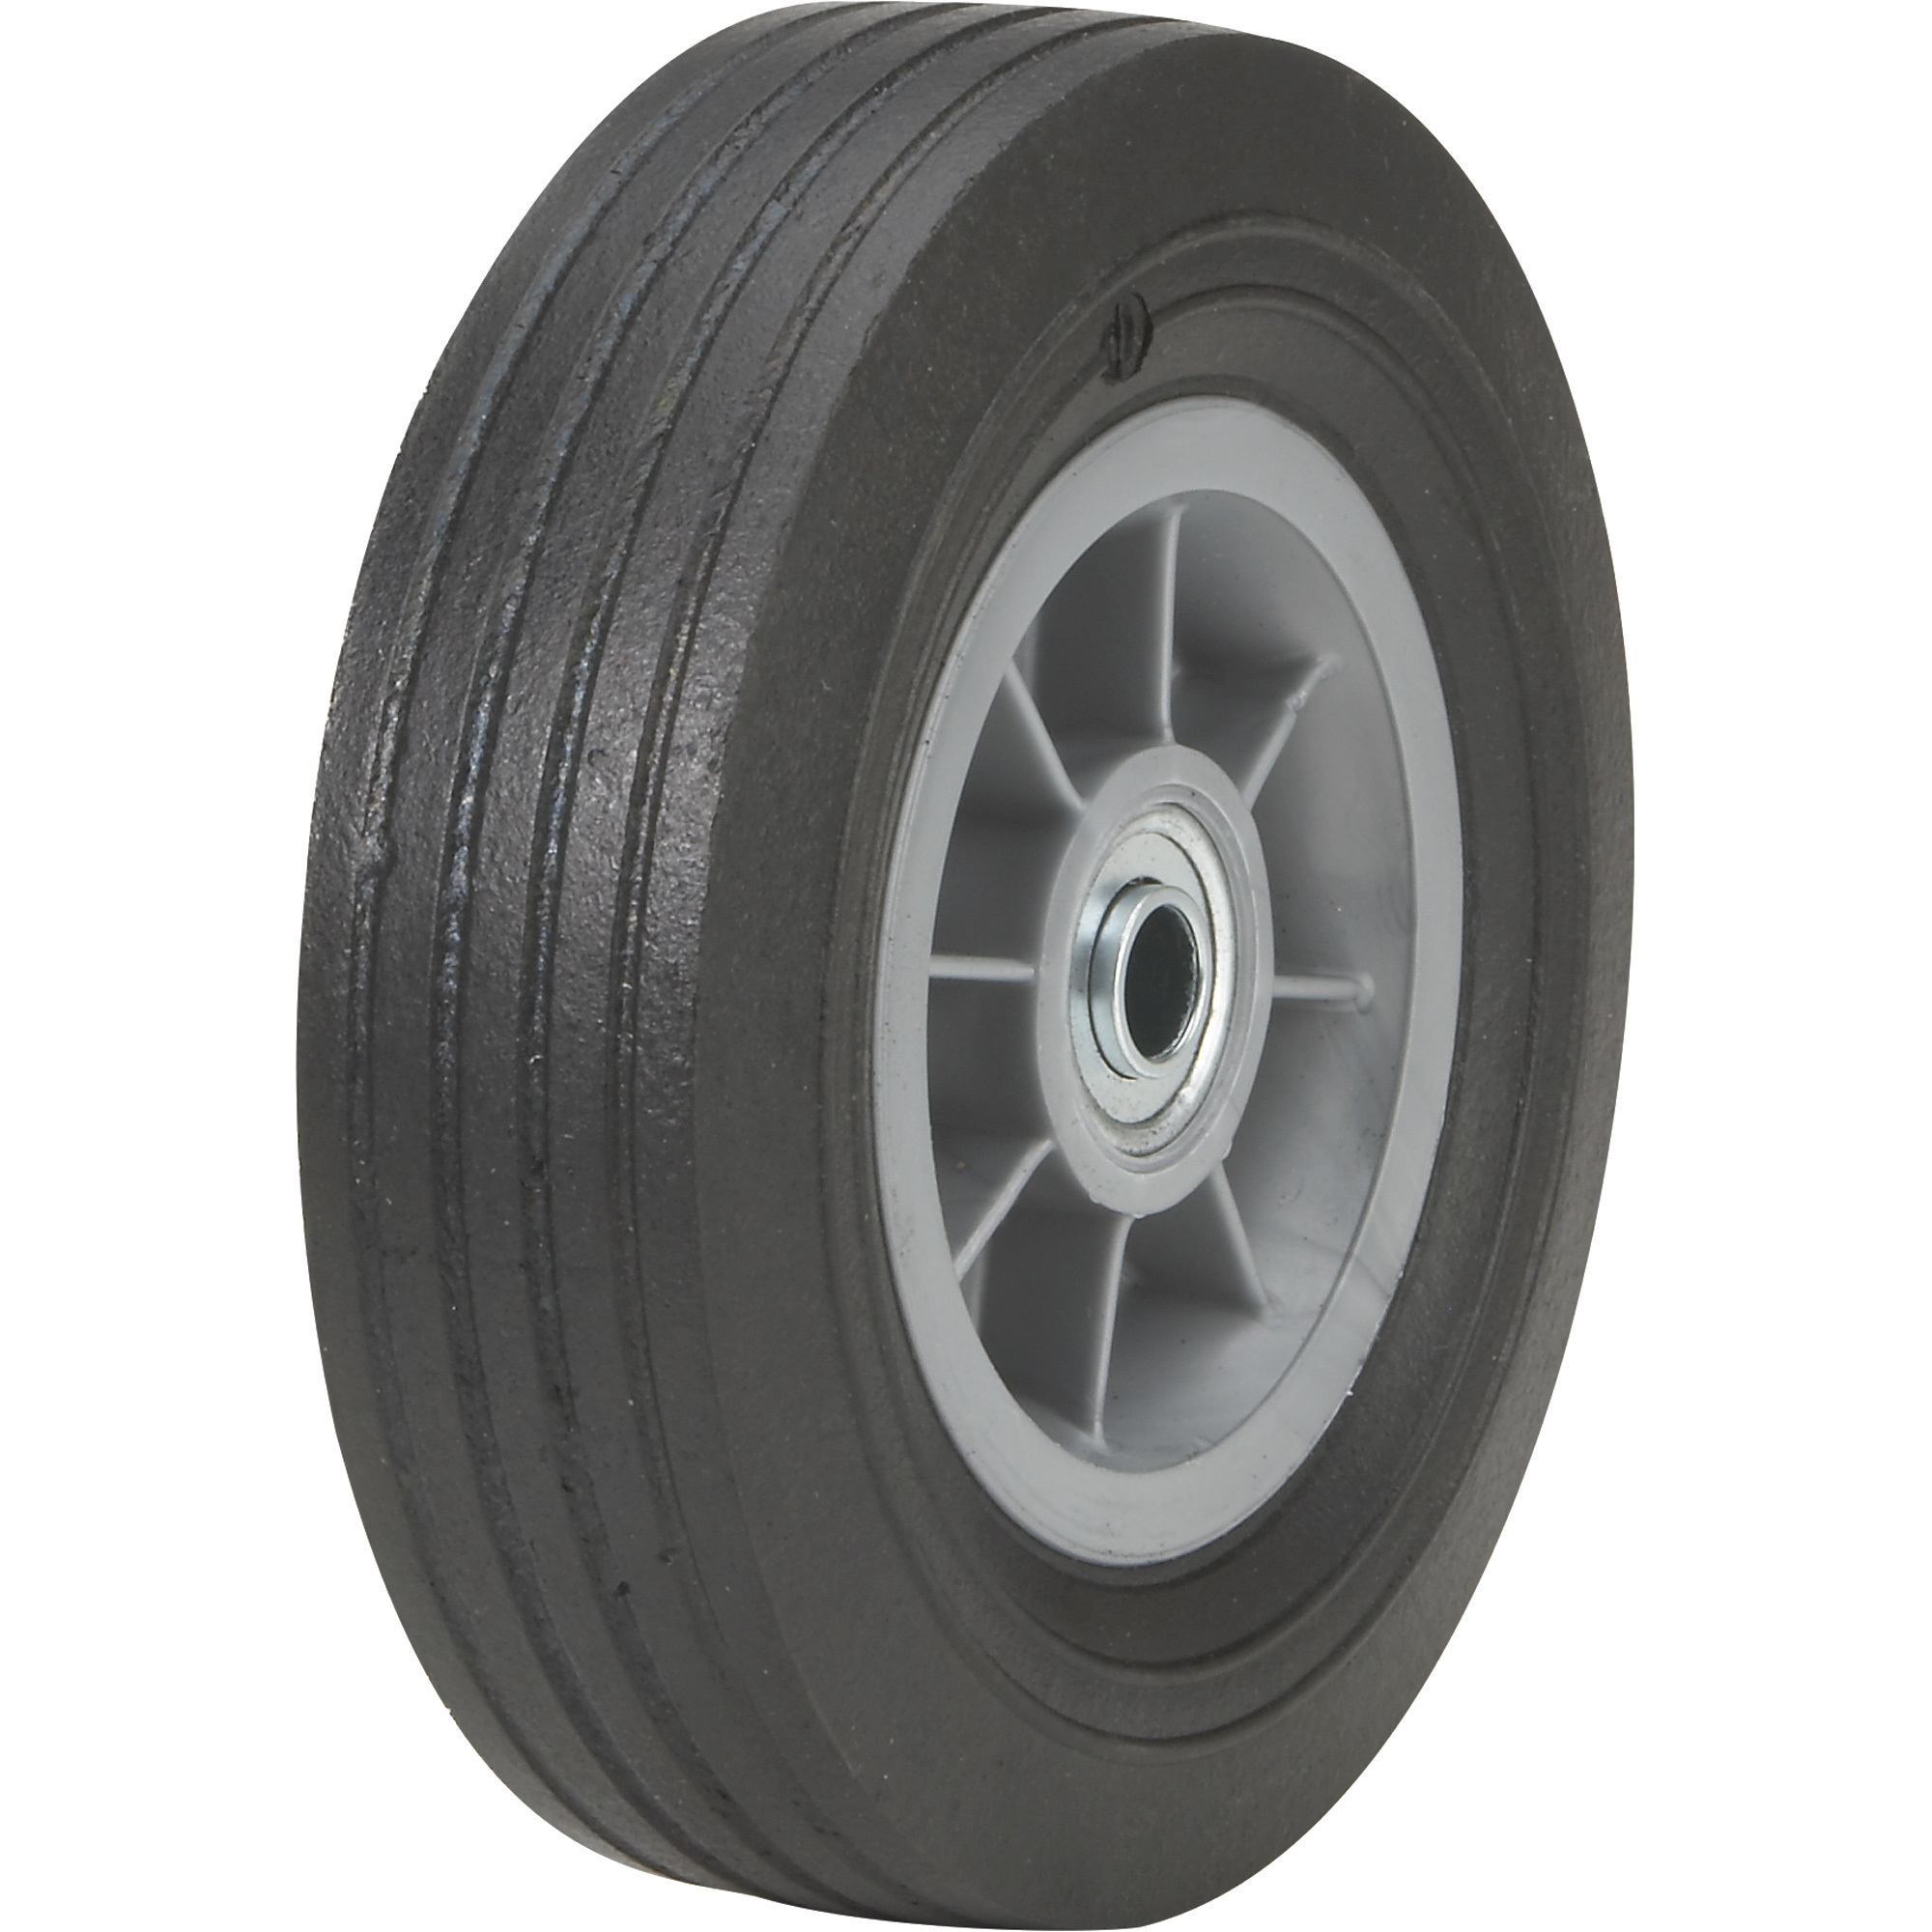 Martin Flat-Free Solid Rubber Tire and Poly Wheel â 8 x 2.50 Tire, Model ZP182RT-202